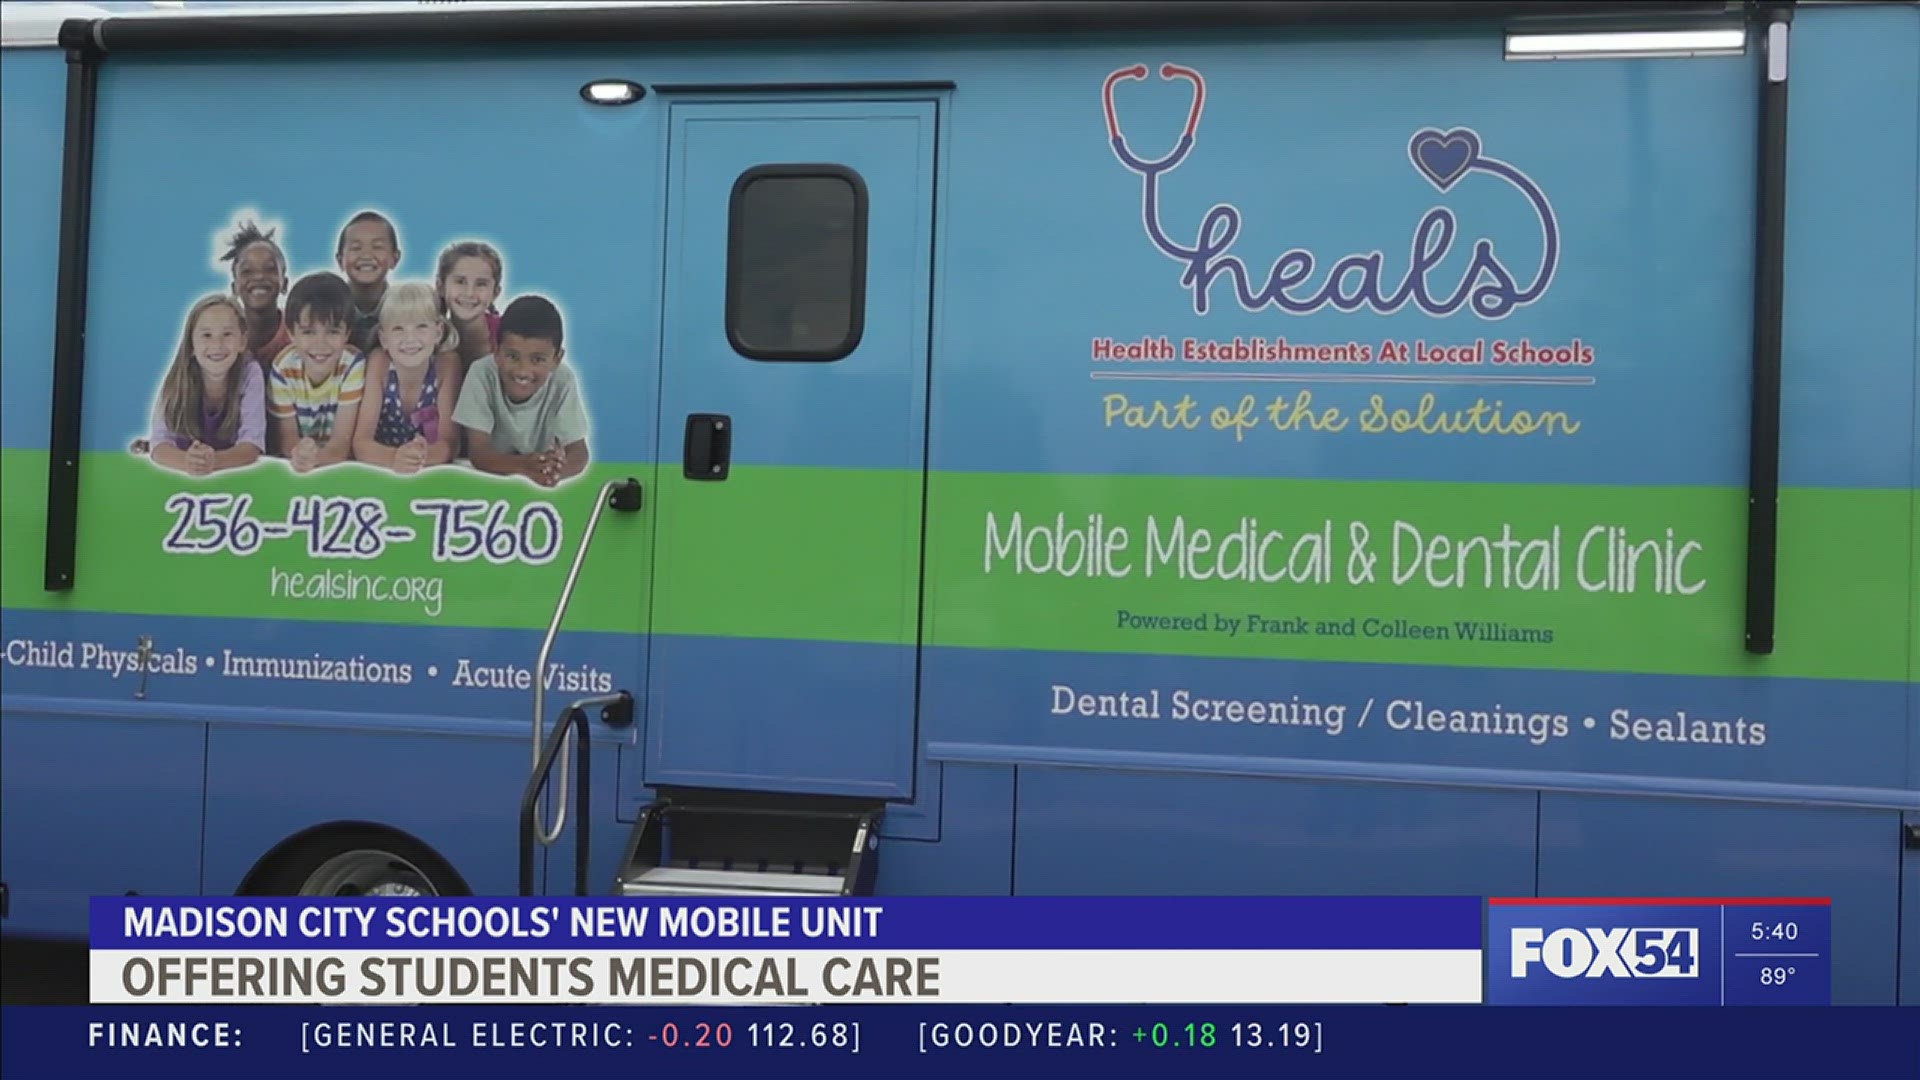 A partnership between Madison City Schools and HEALS, Inc. will bring mobile medical care to MCS students.